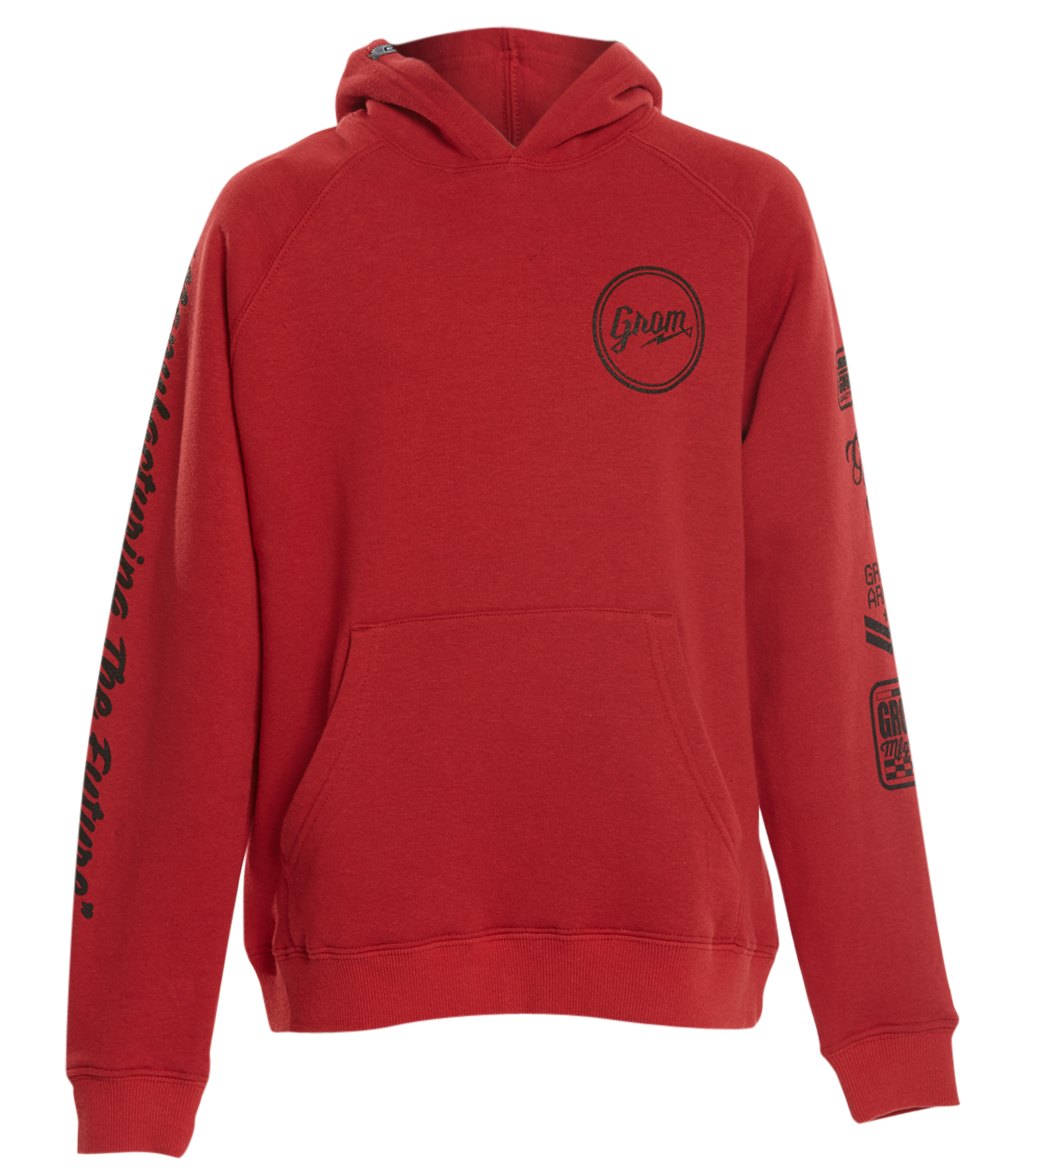 Grom Boys' Circle Script Pull Over Hoodie Kid Big Kid - Red X-Small 4-5 Cotton/Polyester - Swimoutlet.com